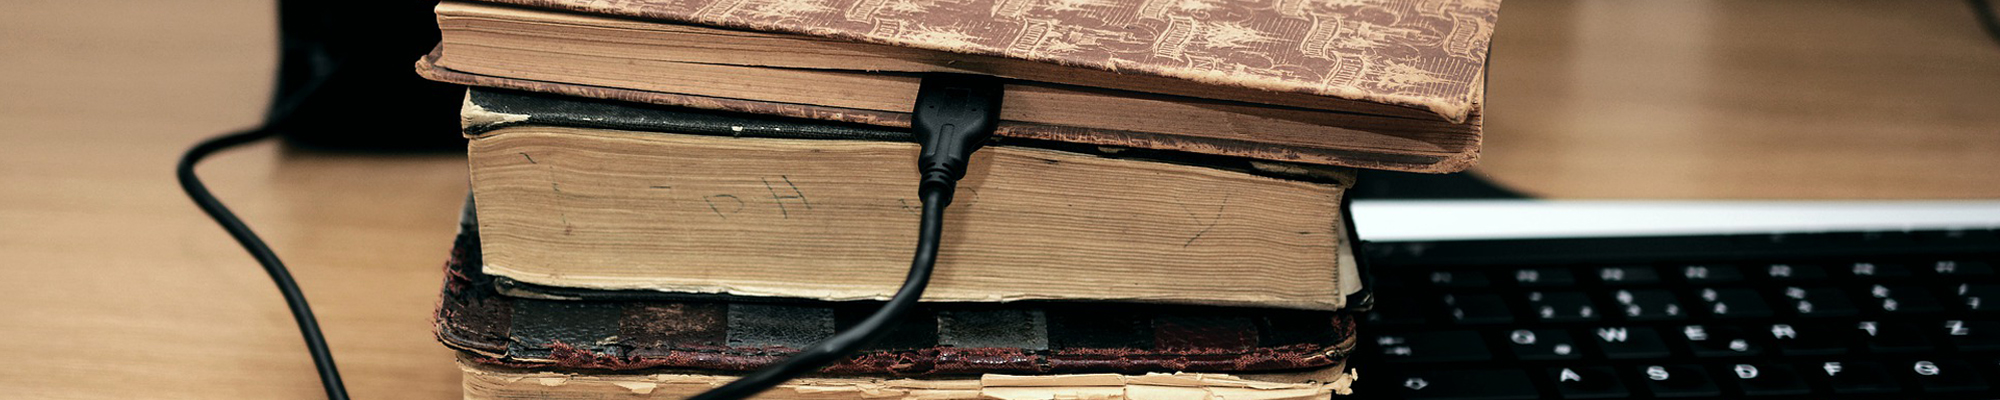 old books with charging cord coming out it next to computer keyboard